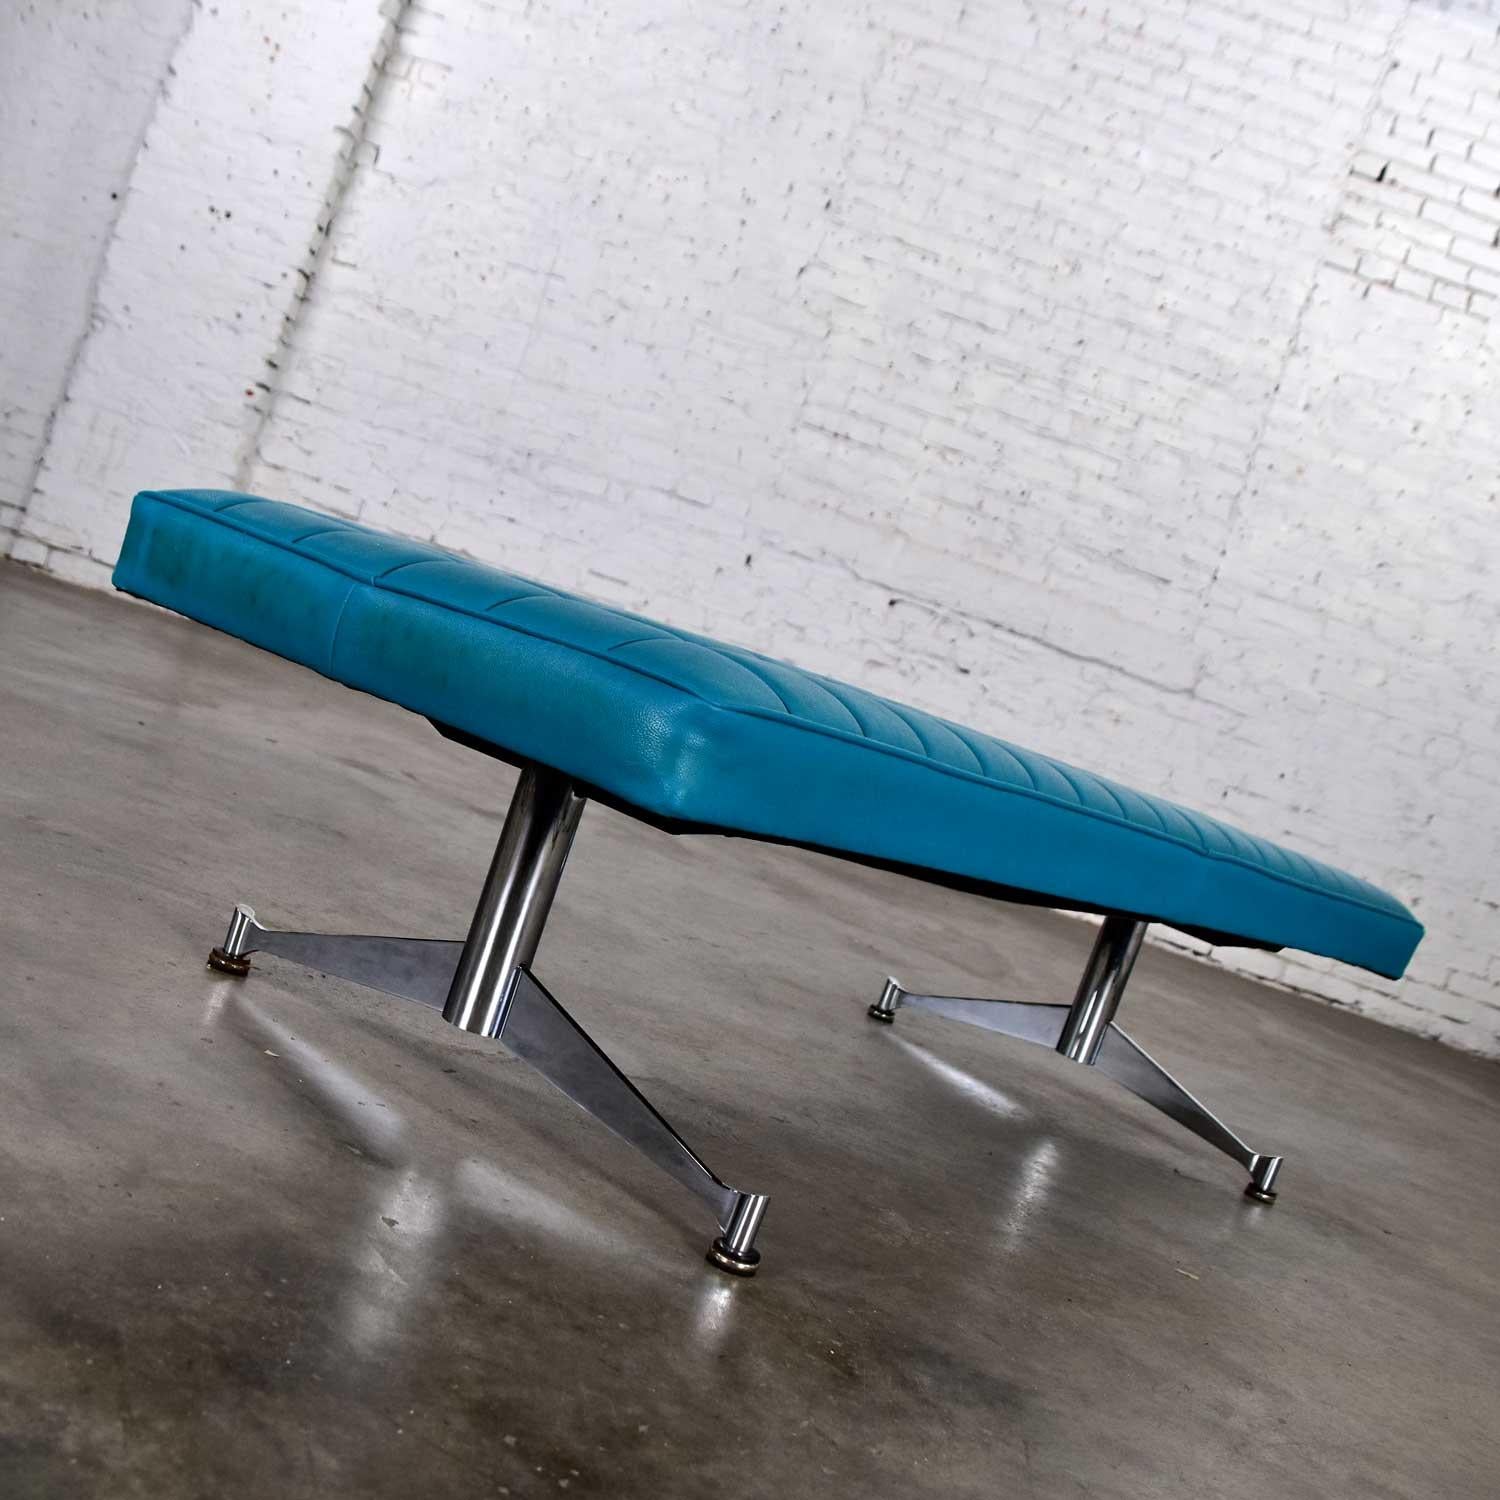 Madison Furn. Vinyl Faux Leather Turquoise Chrome Bench Daybed Style A. Umanoff In Good Condition For Sale In Topeka, KS